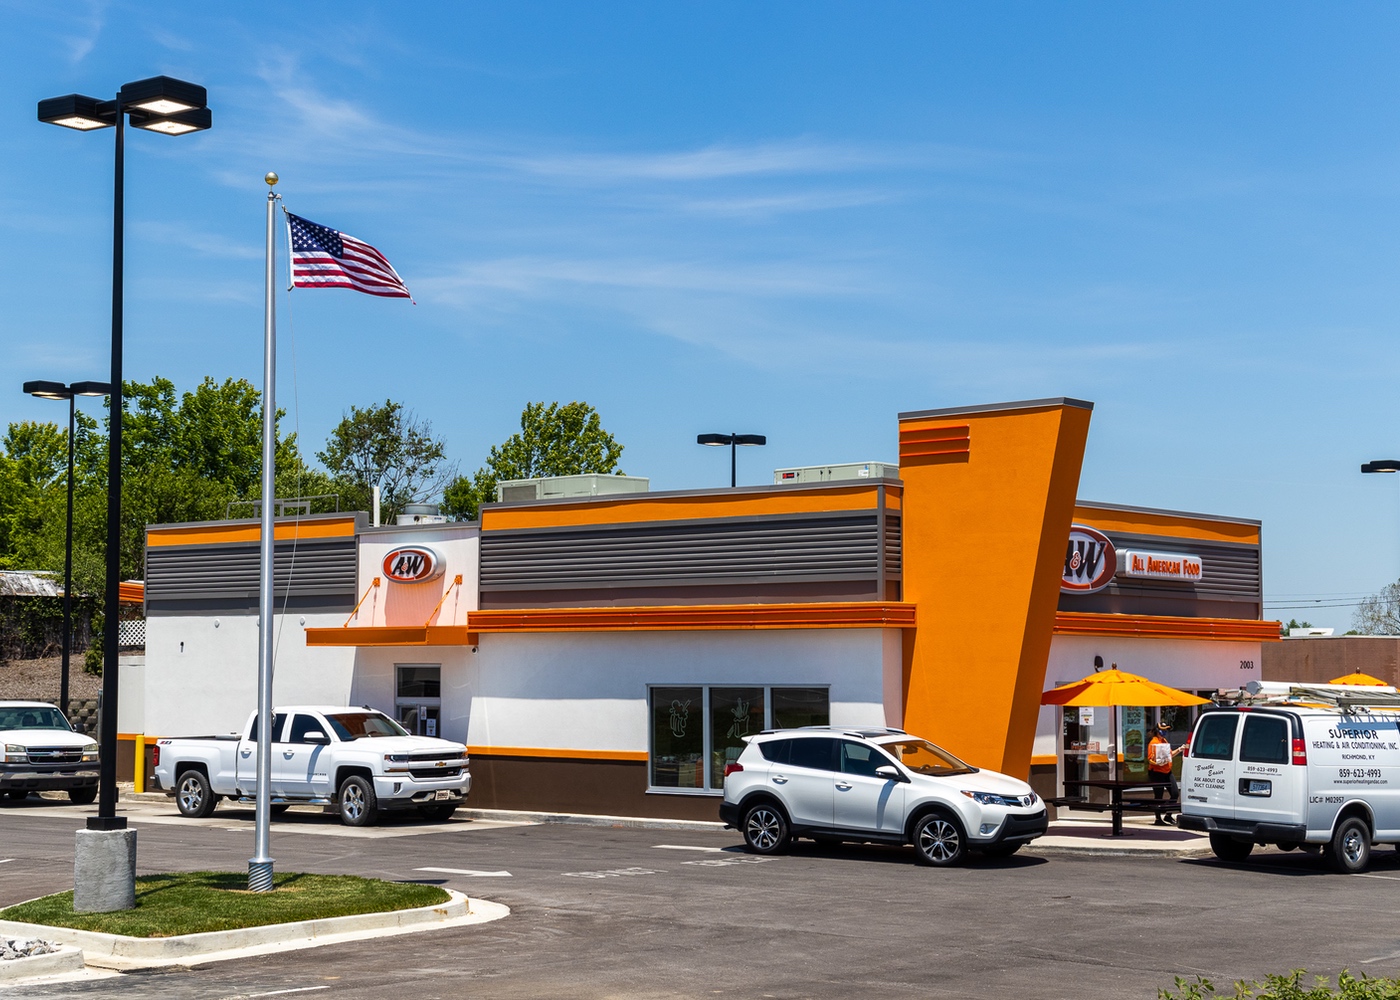 Exterior side view photo of A&W Restaurant showing cars in drive-thru and team member walking bag out to car.